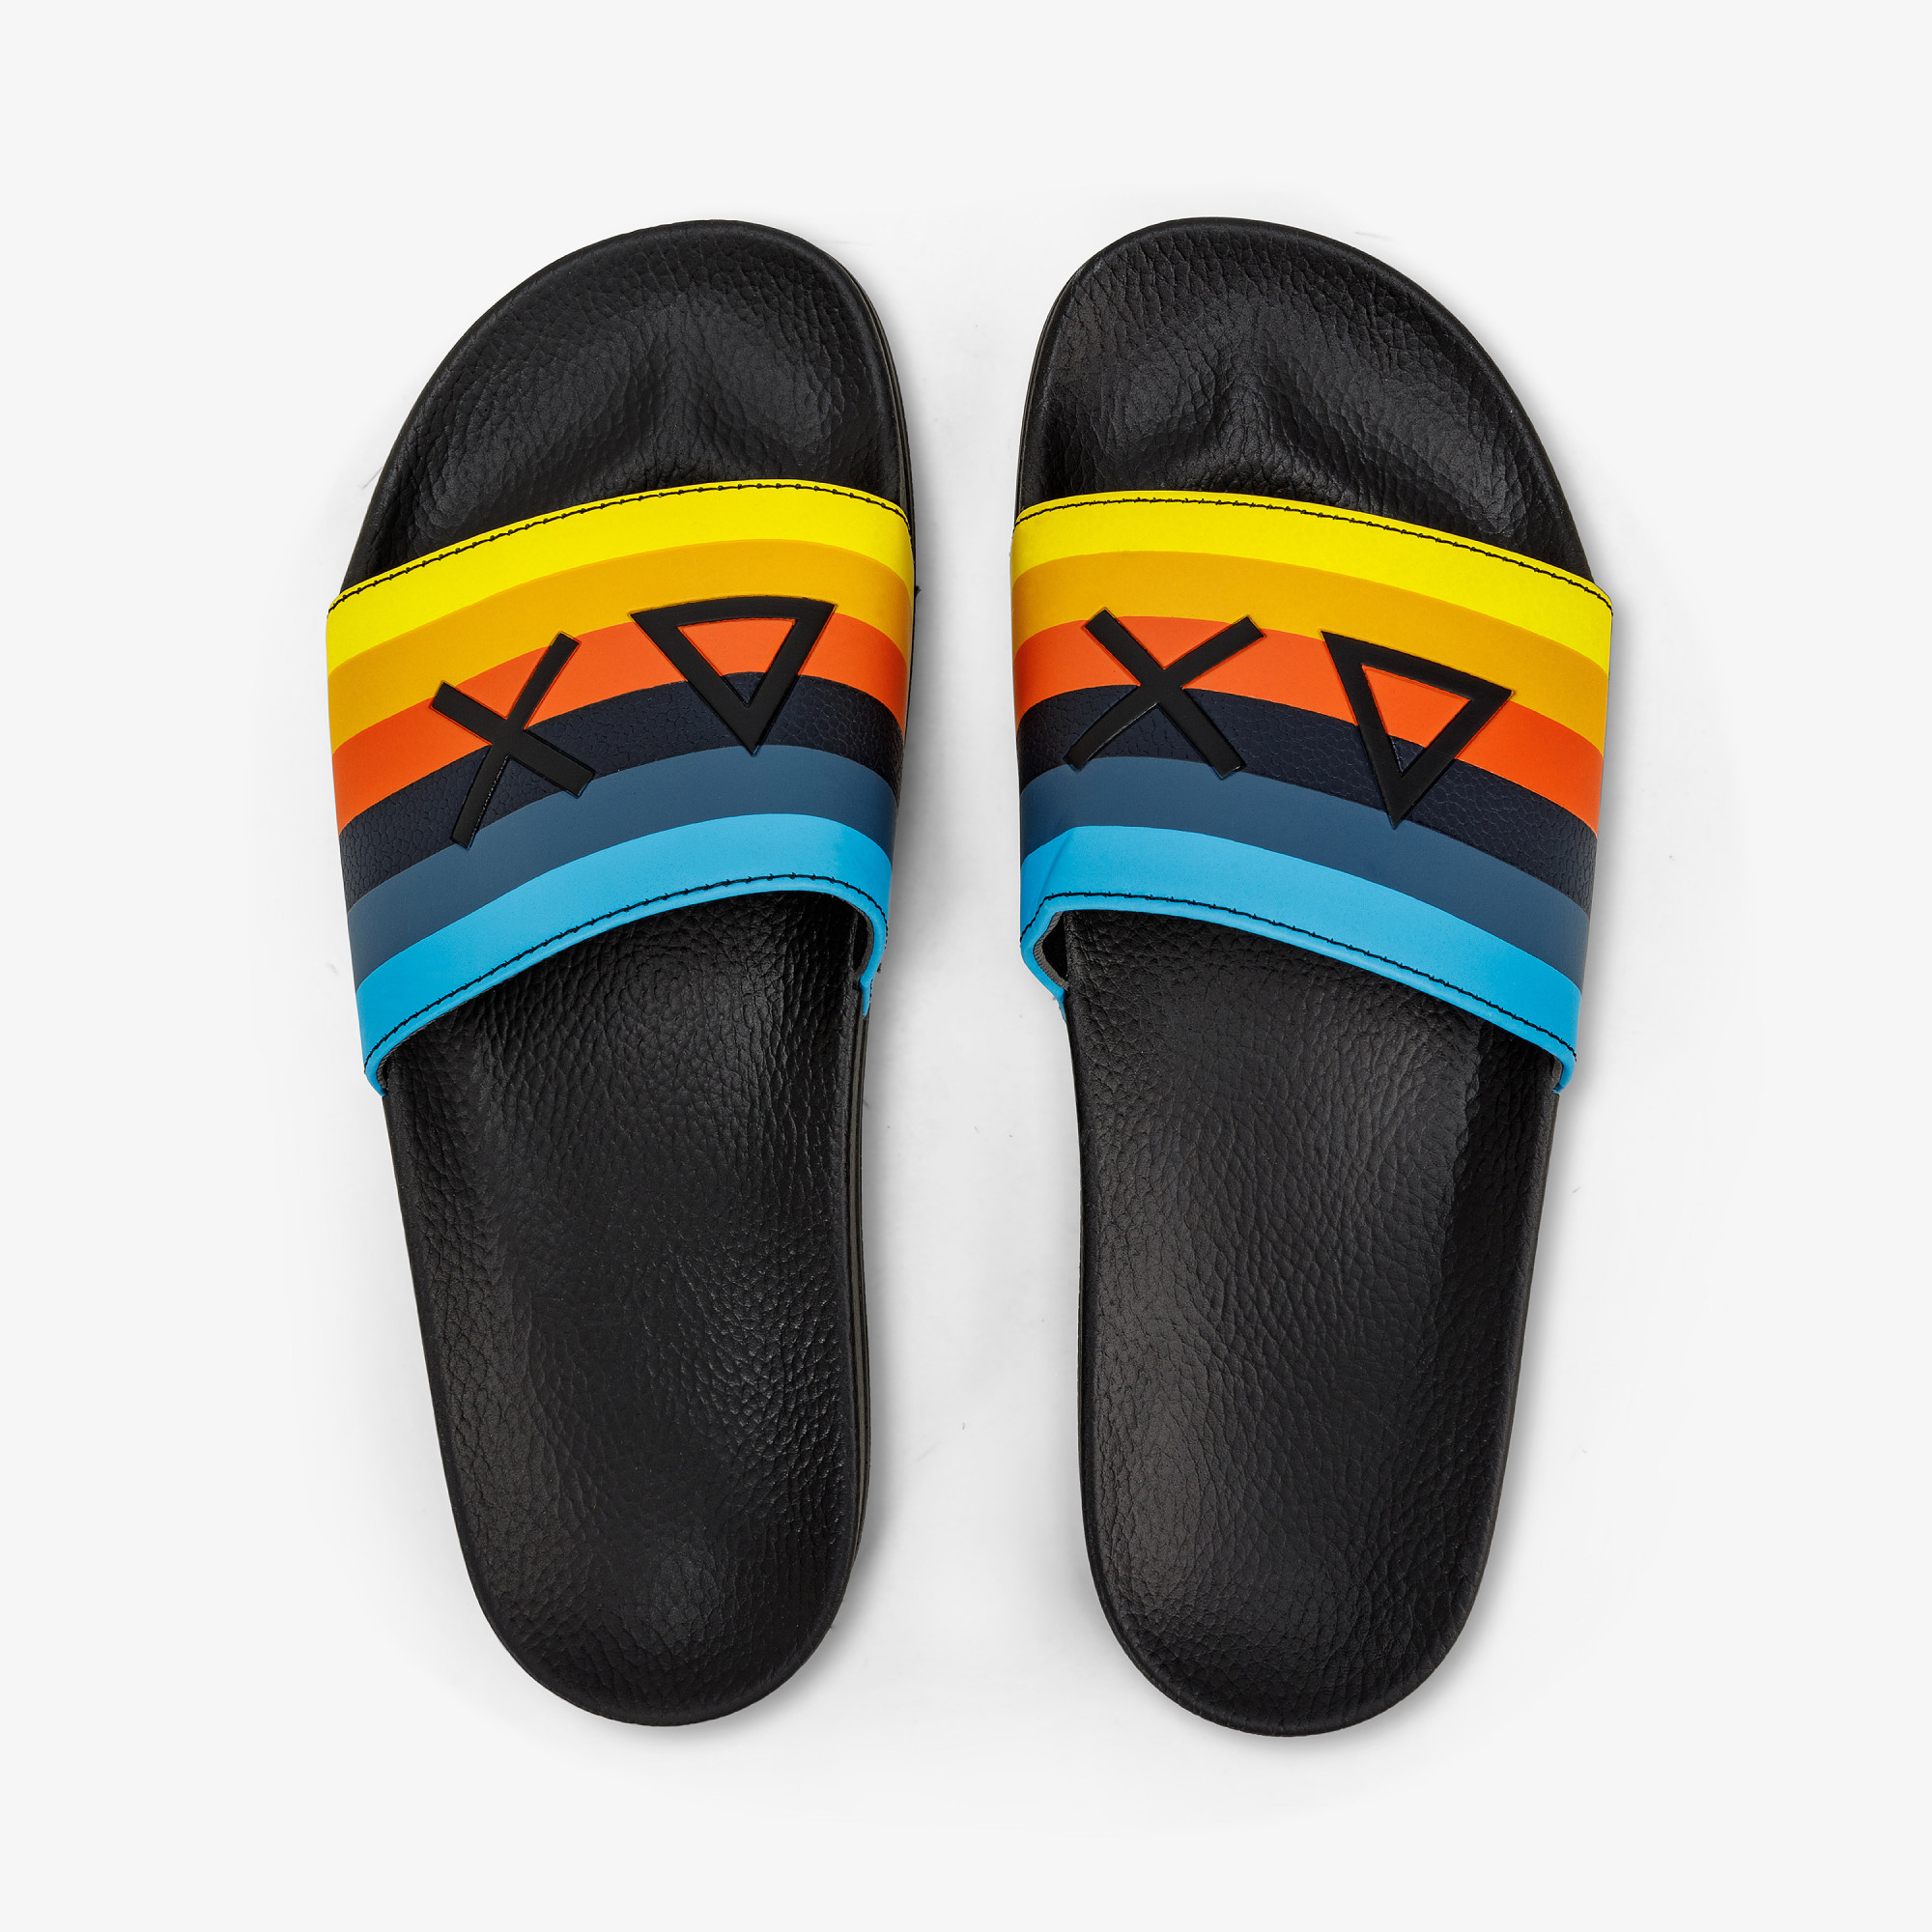 SLIPPERS BLACK/TURQUOISE